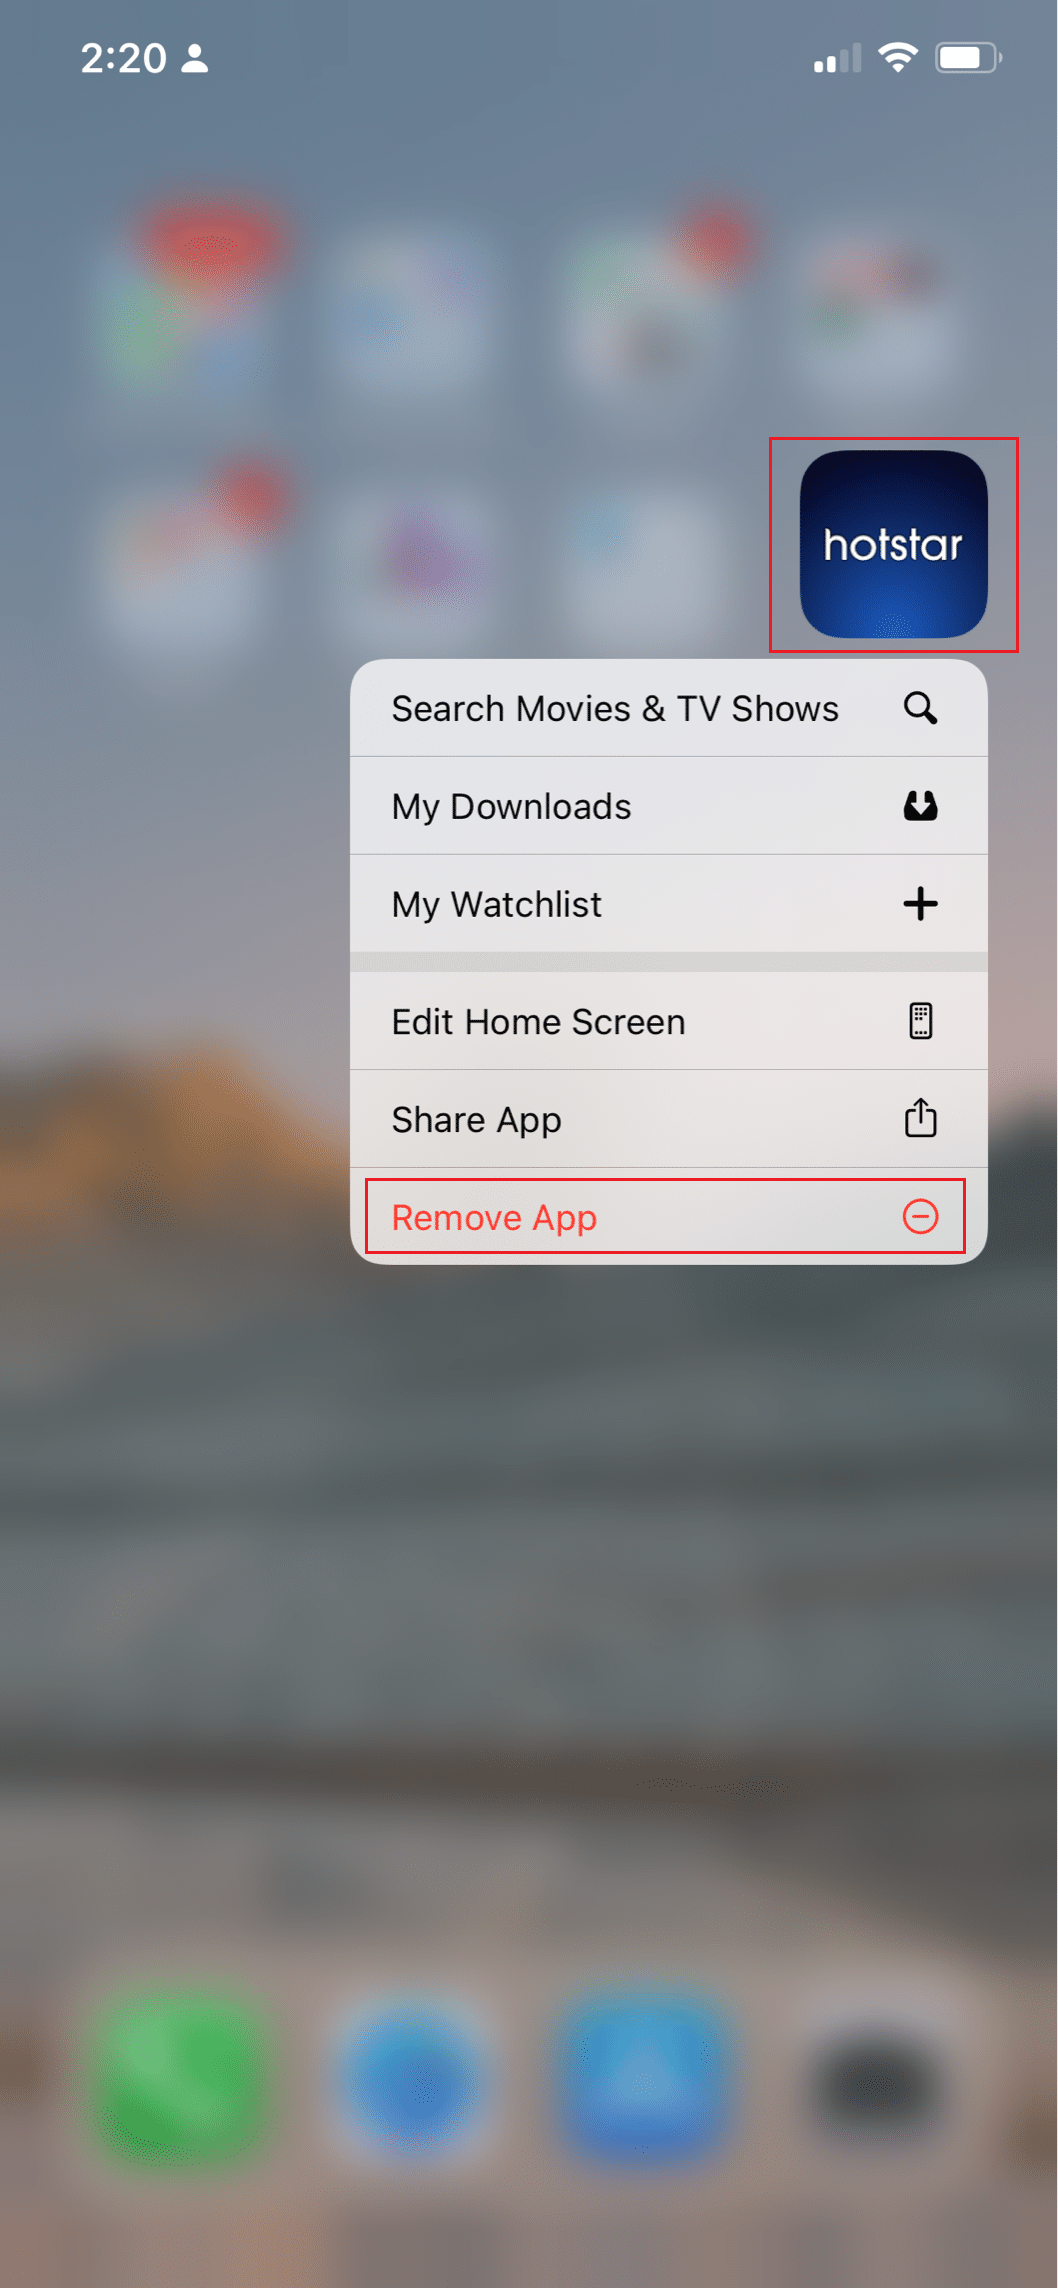 select the Remove app option for Hotstar app in iPhone